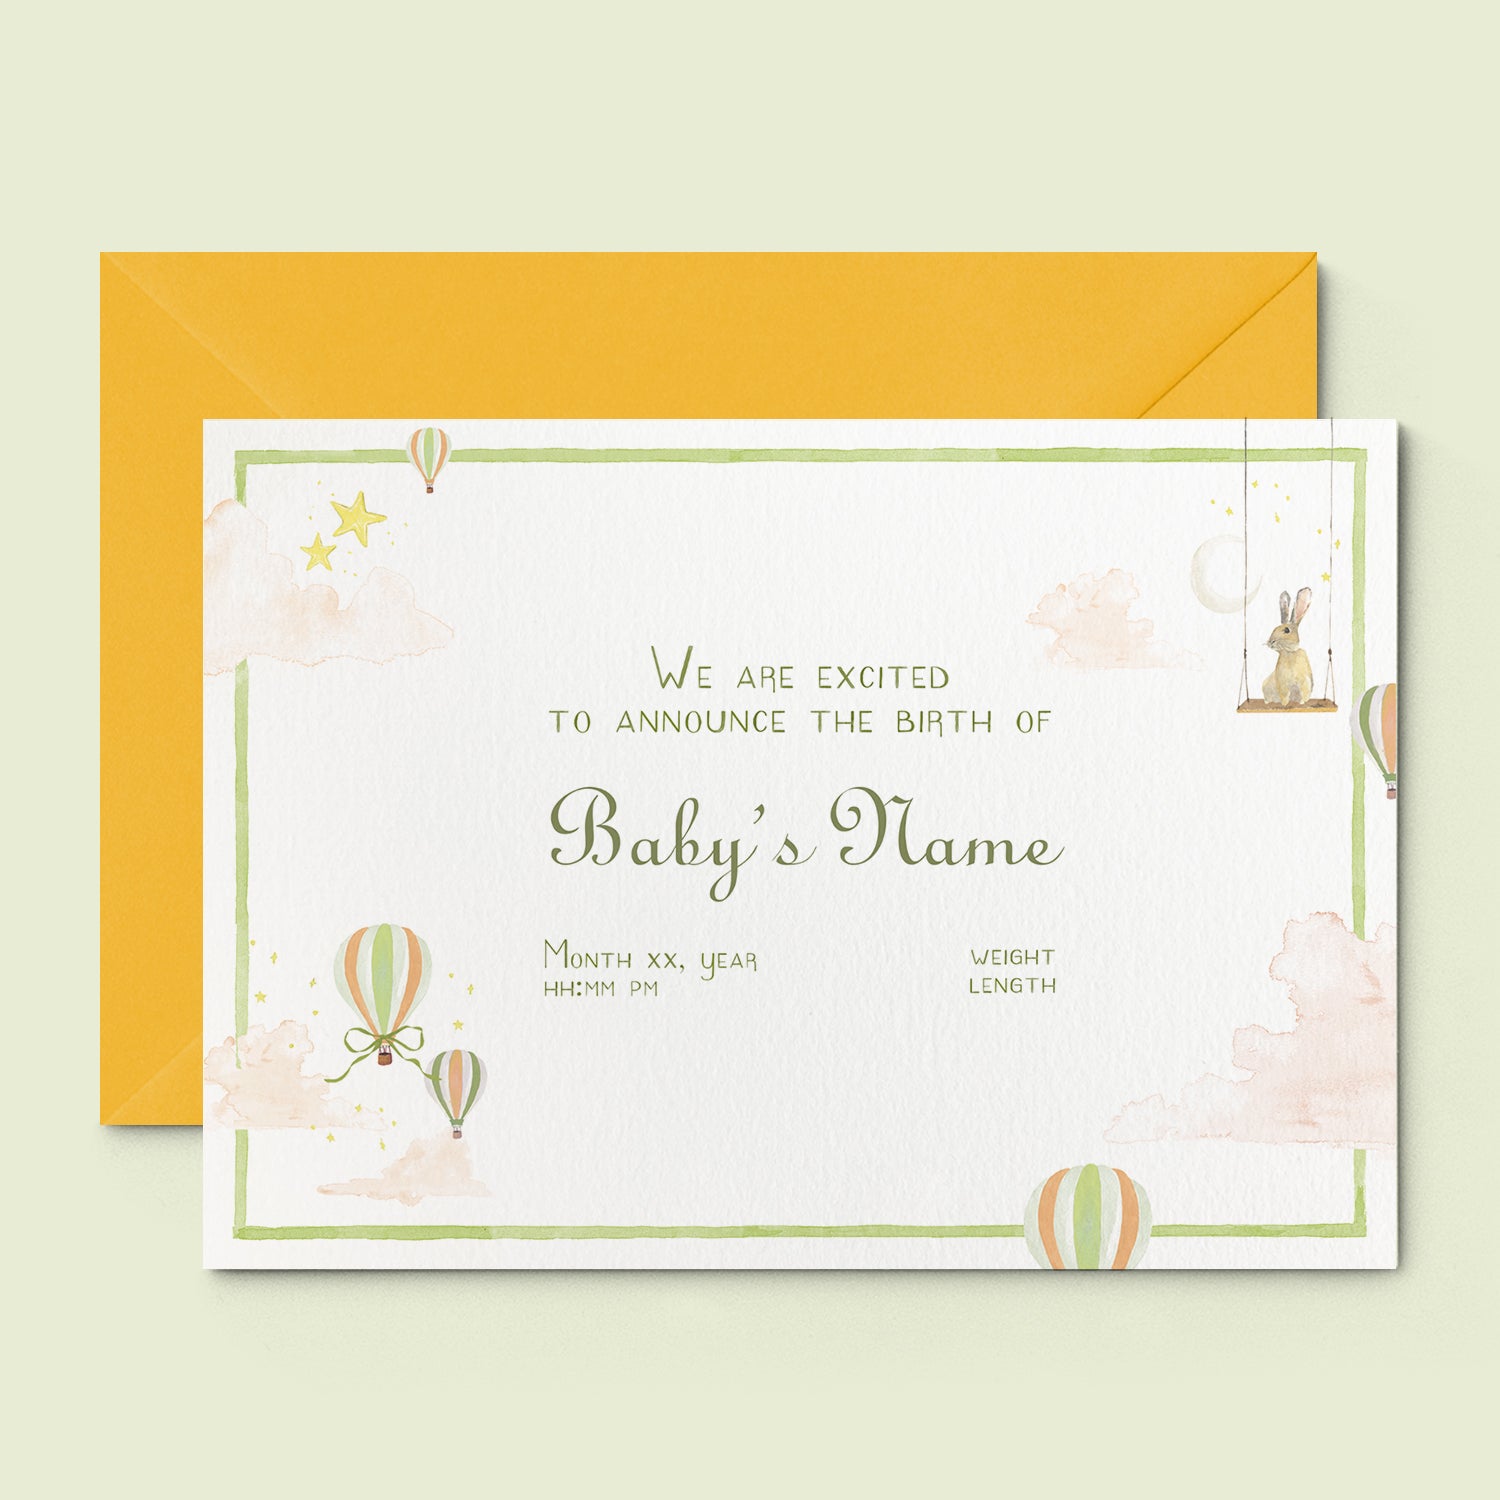 Hot Air Balloons Printed Birth Announcements - Without Photo - 05